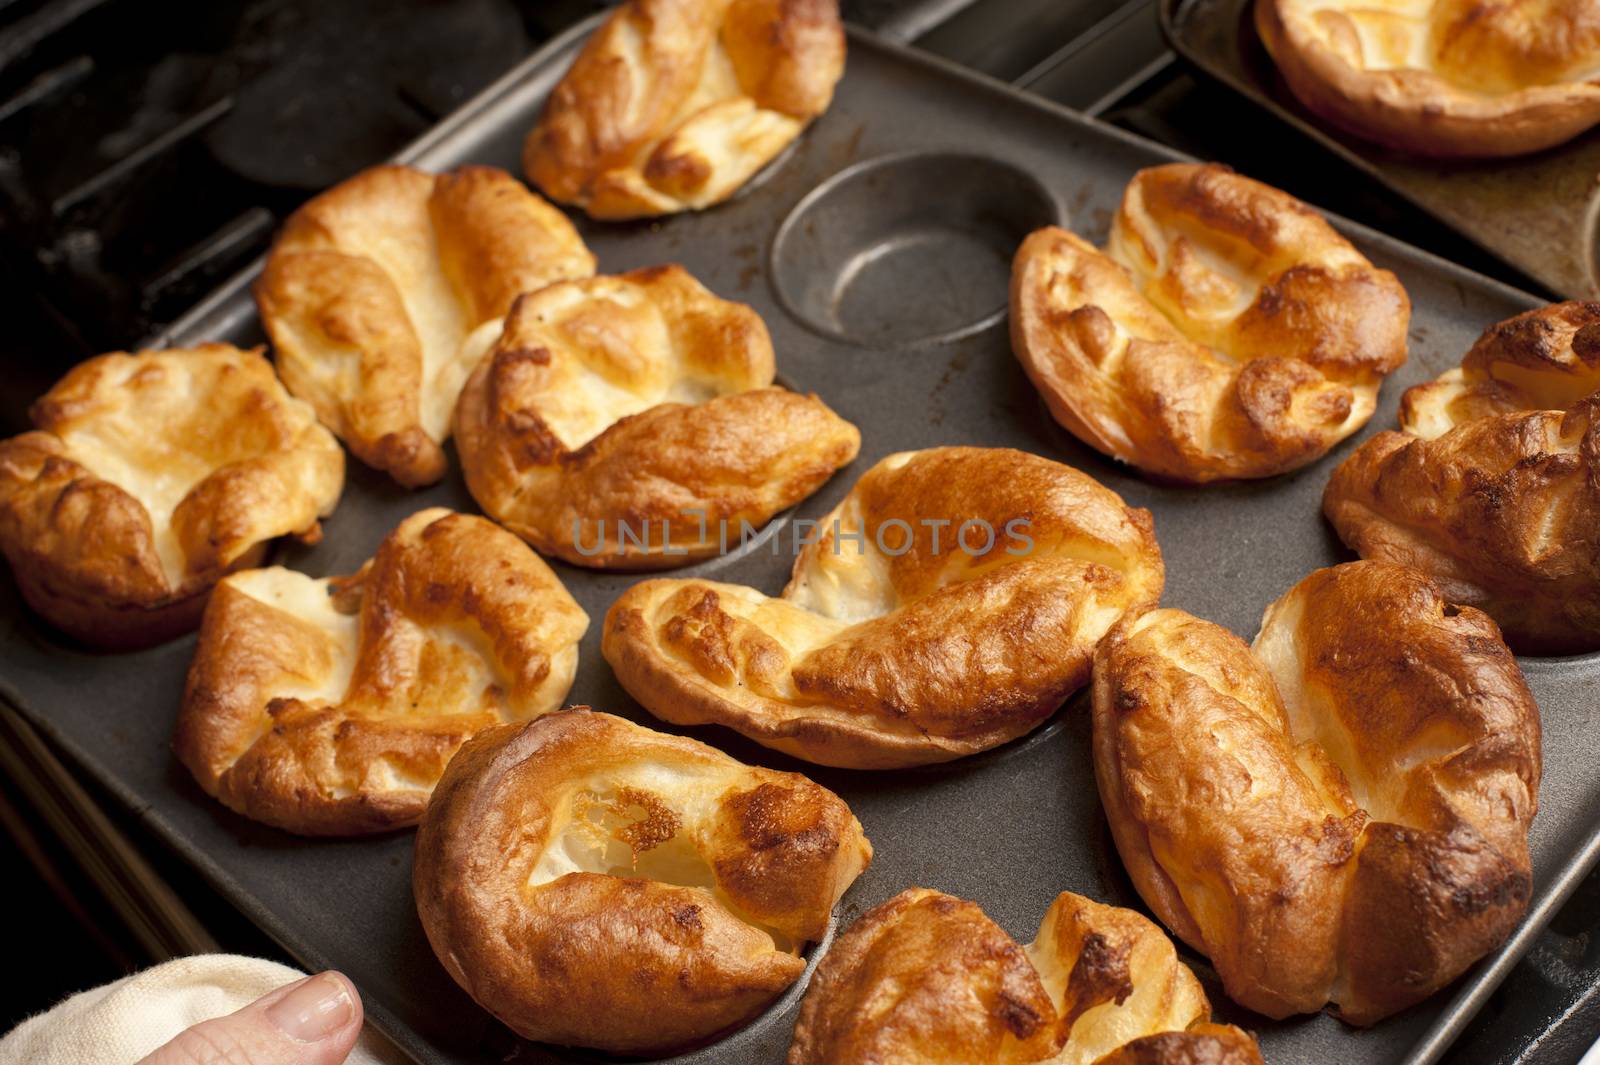 Traditional English Yorkshire puddings made from batter in a baking tray waiting to accompany a meal of roast beef